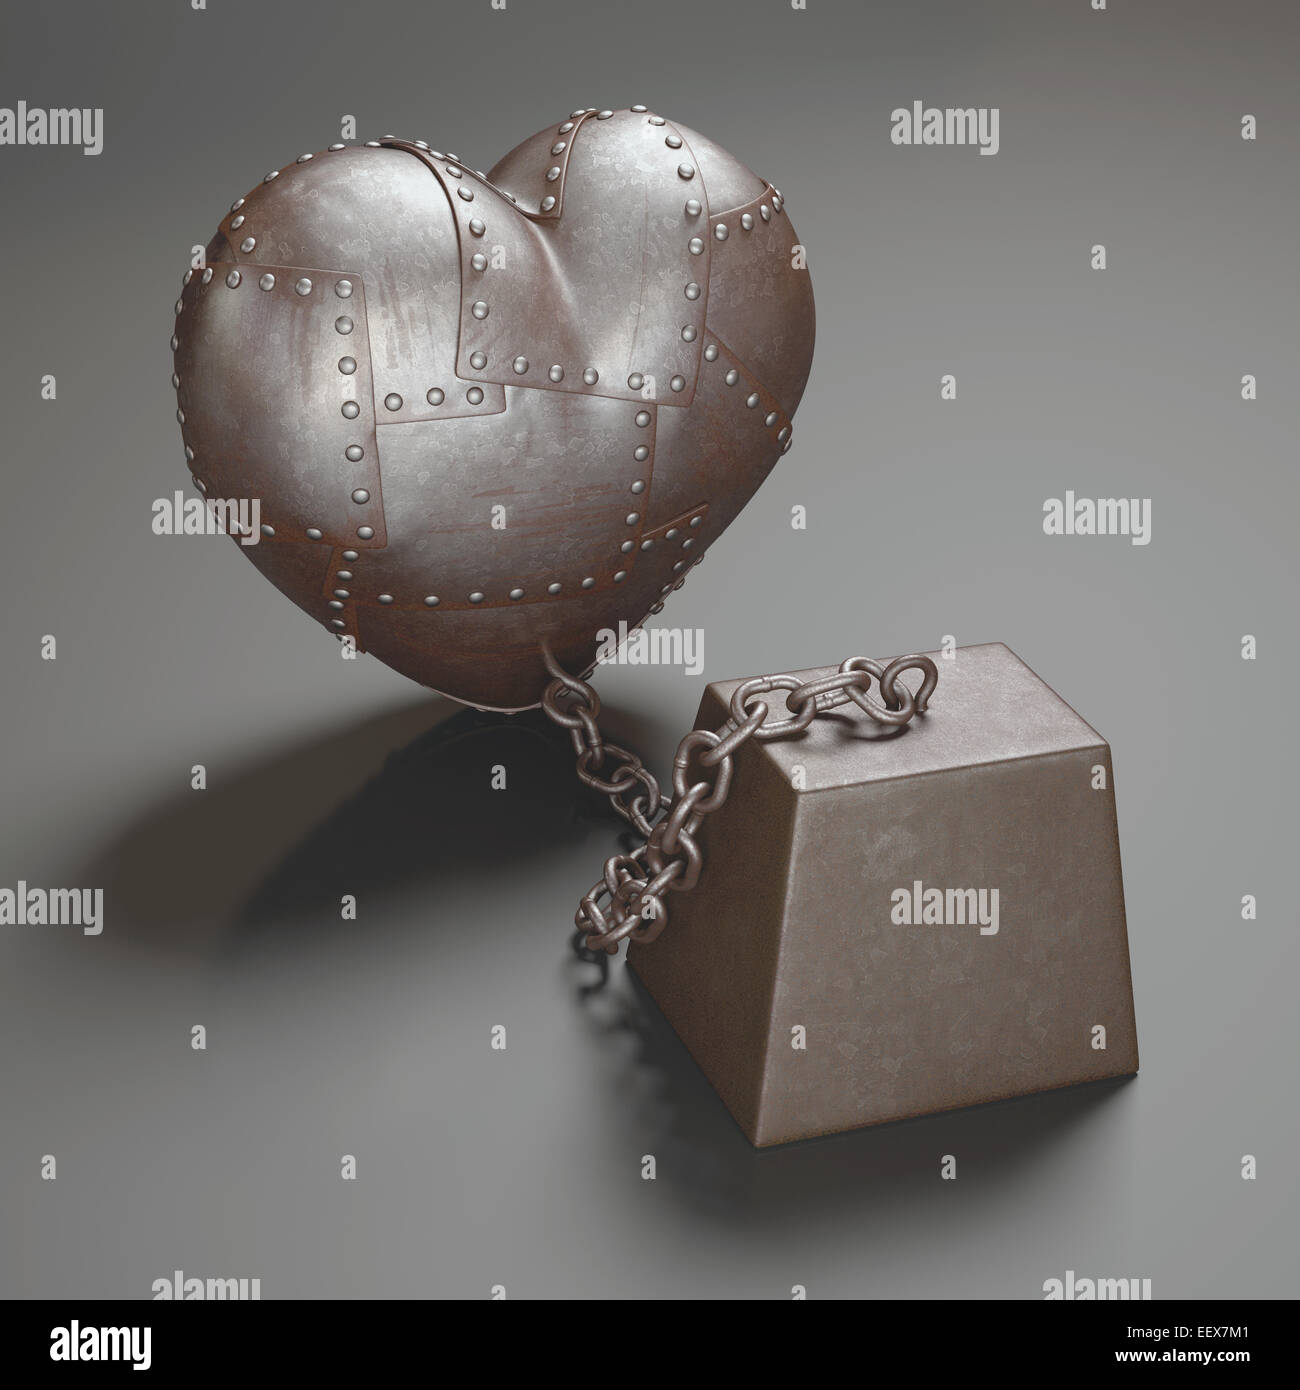 Coated steel heart attached to chains. Clipping path included. Stock Photo